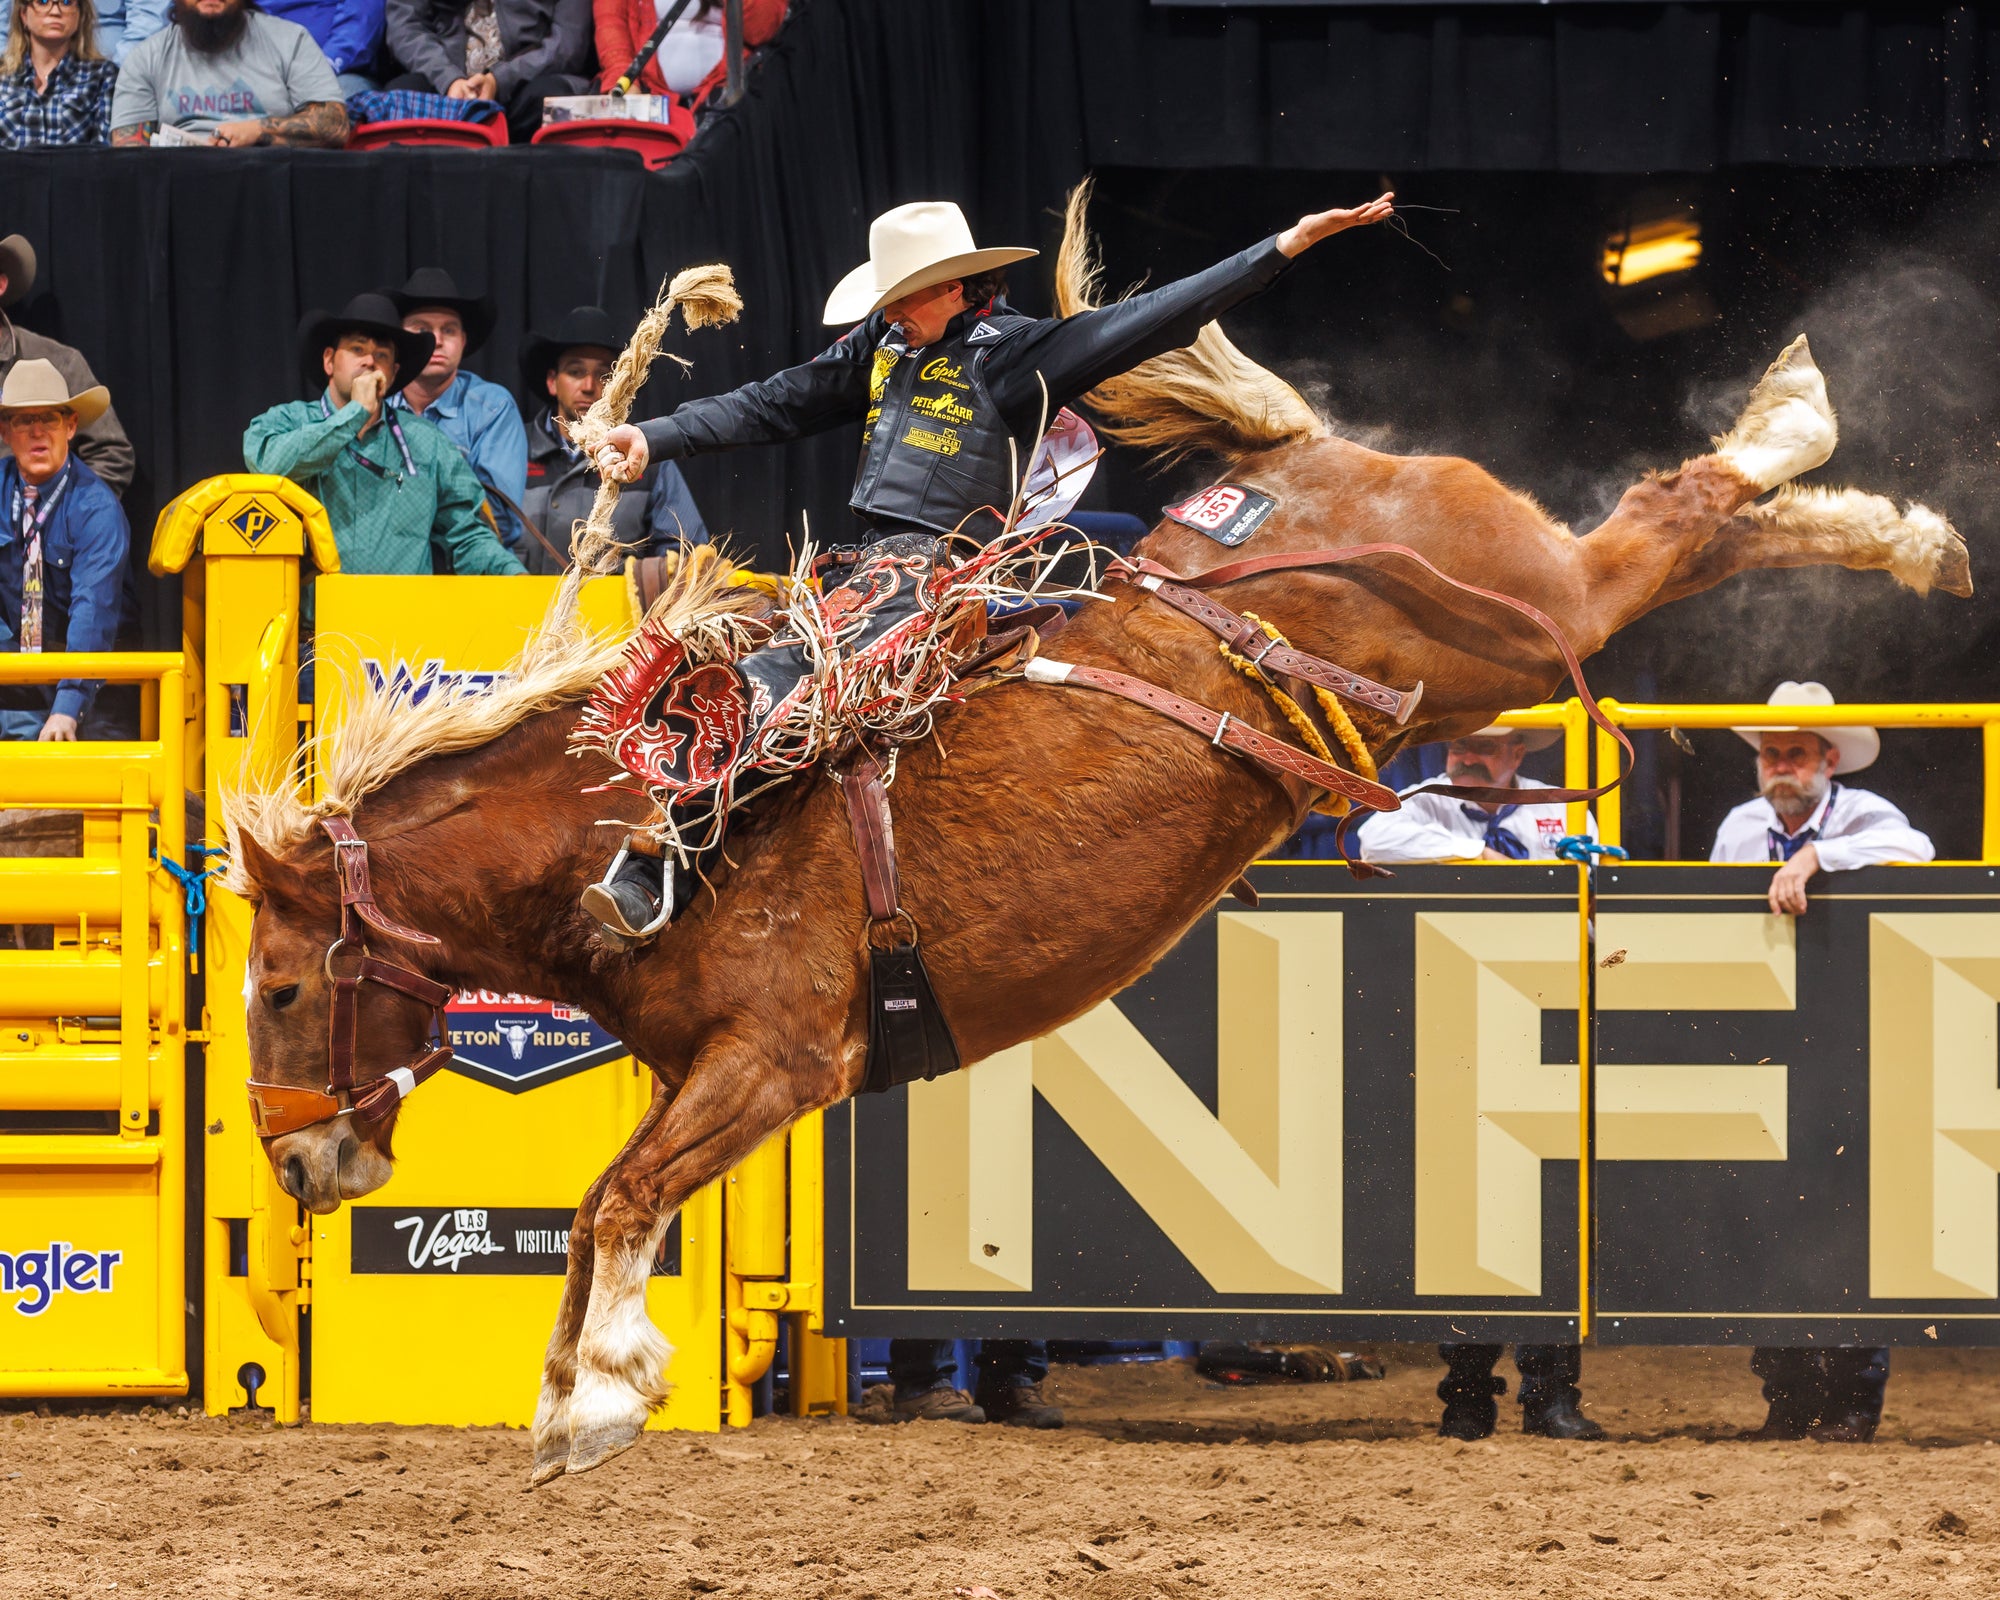 Grab the latest NFR gear here